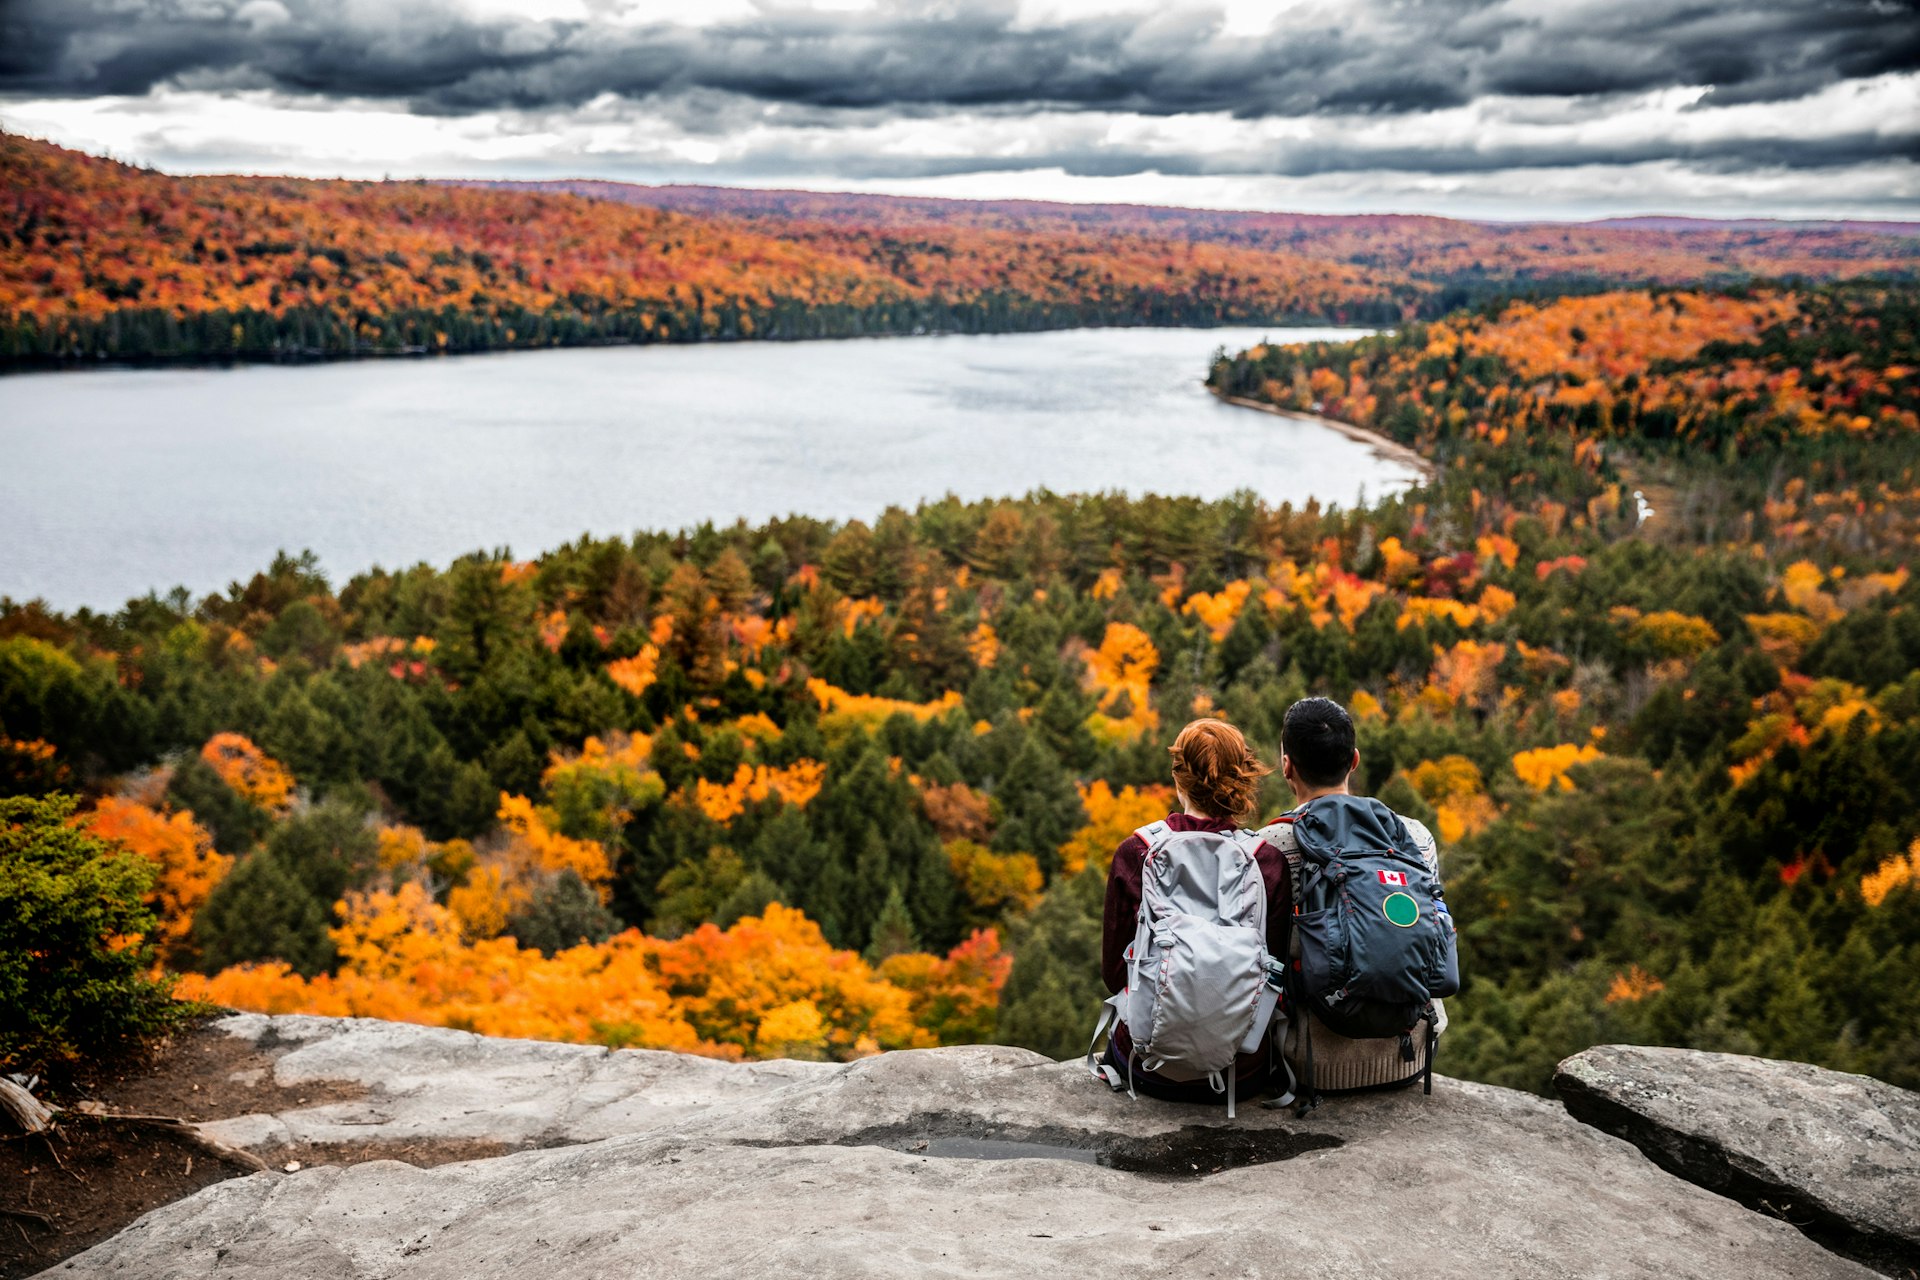 Taking in the view from Algonquin Park in Ontario, Canada